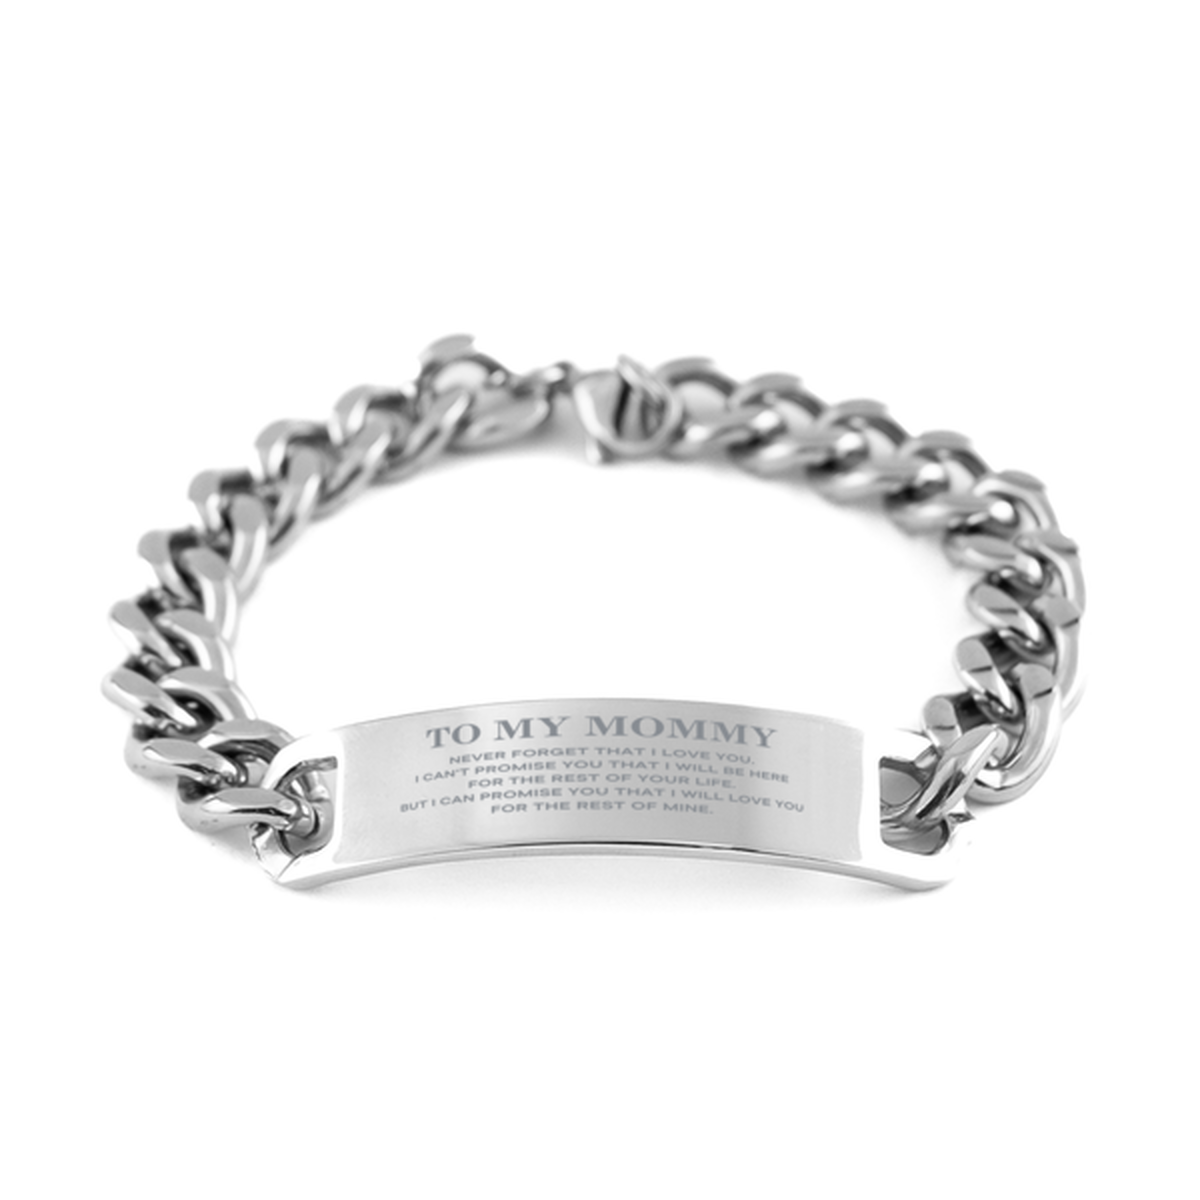 To My Mommy Gifts, I will love you for the rest of mine, Love Mommy Bracelet, Birthday Christmas Unique Cuban Chain Stainless Steel Bracelet For Mommy